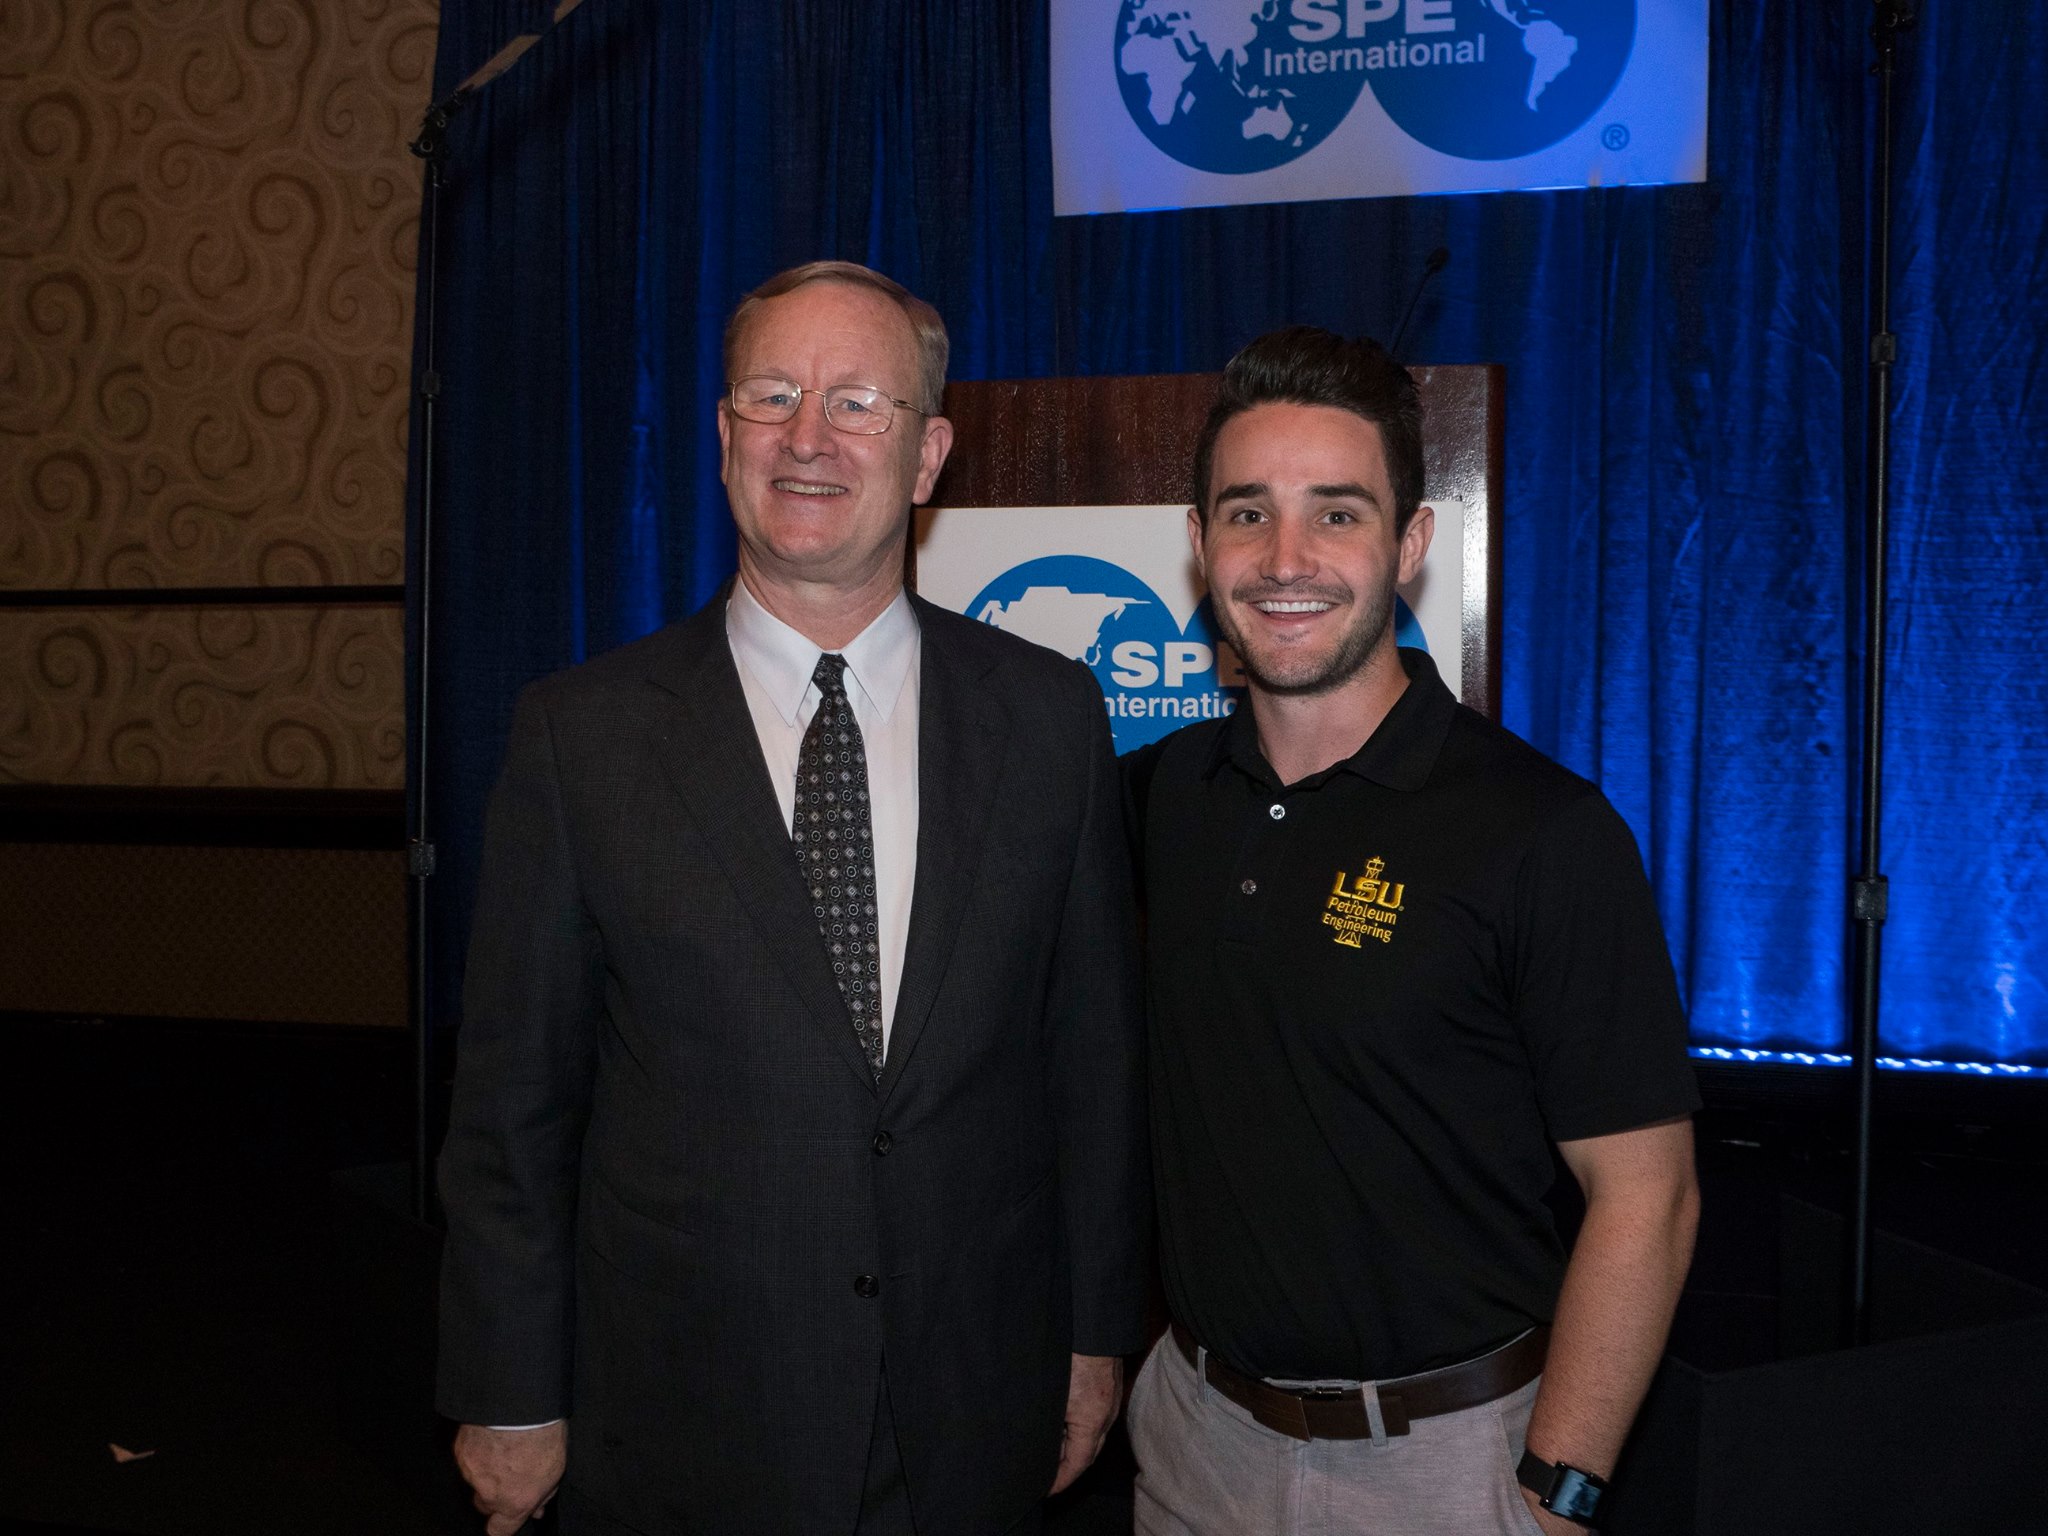 SPEI president Nathan Meehan and SPE LSU president Ty Nielson